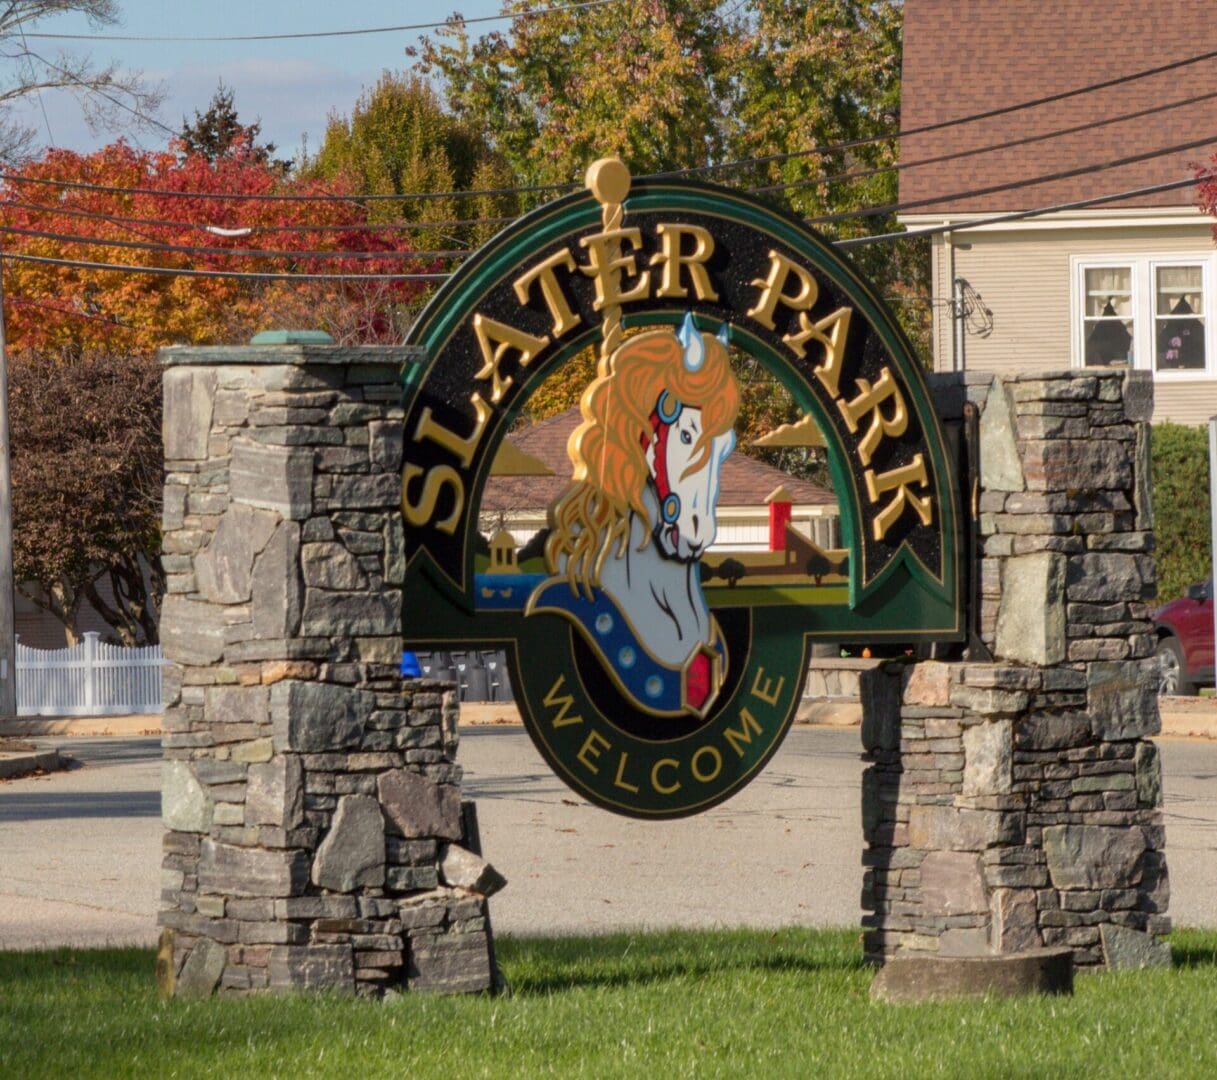 A sign featuring the name "Slater Park.